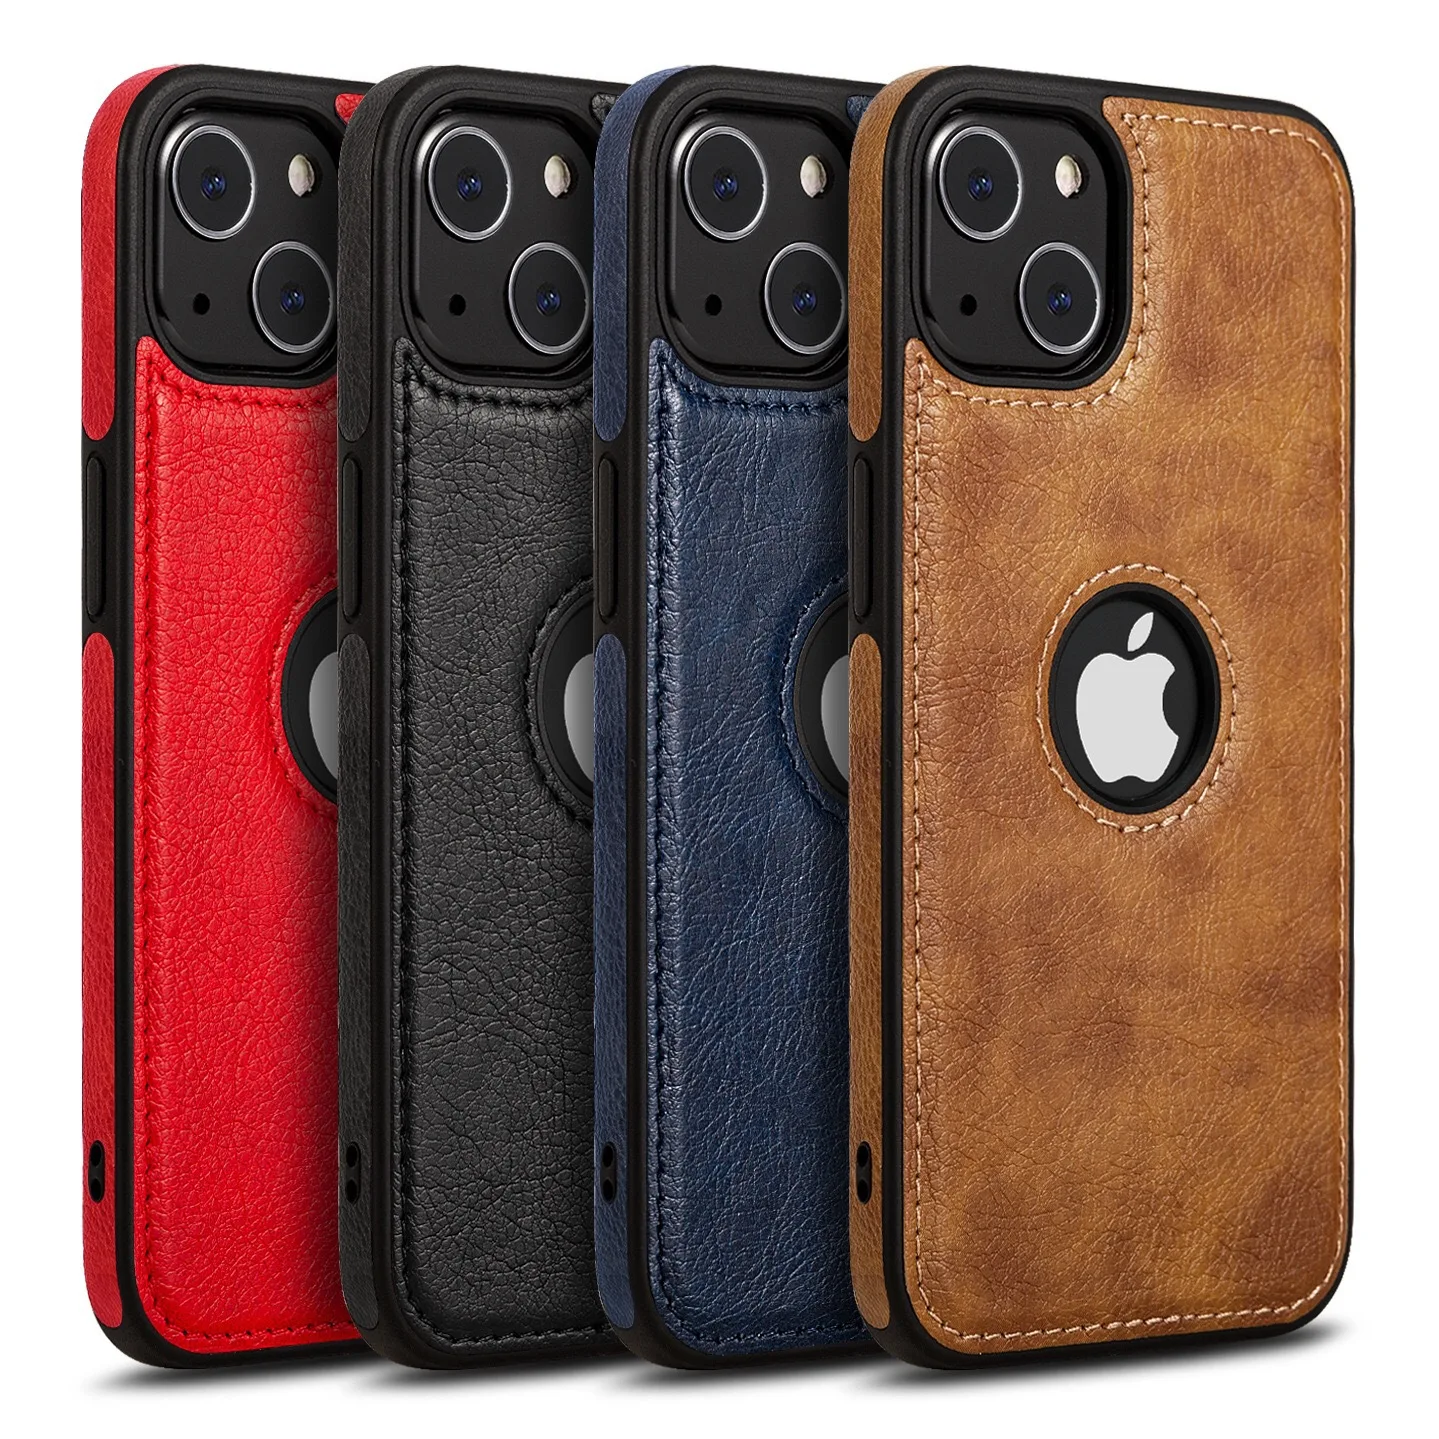 Ultra Thin Slim Leather Phone Case For iPhone 13 Pro Max 12 11 Pro Max XR X 7 8 Plus Shockproof Bumper Soft Business Back Cover case iphone 12 pro max